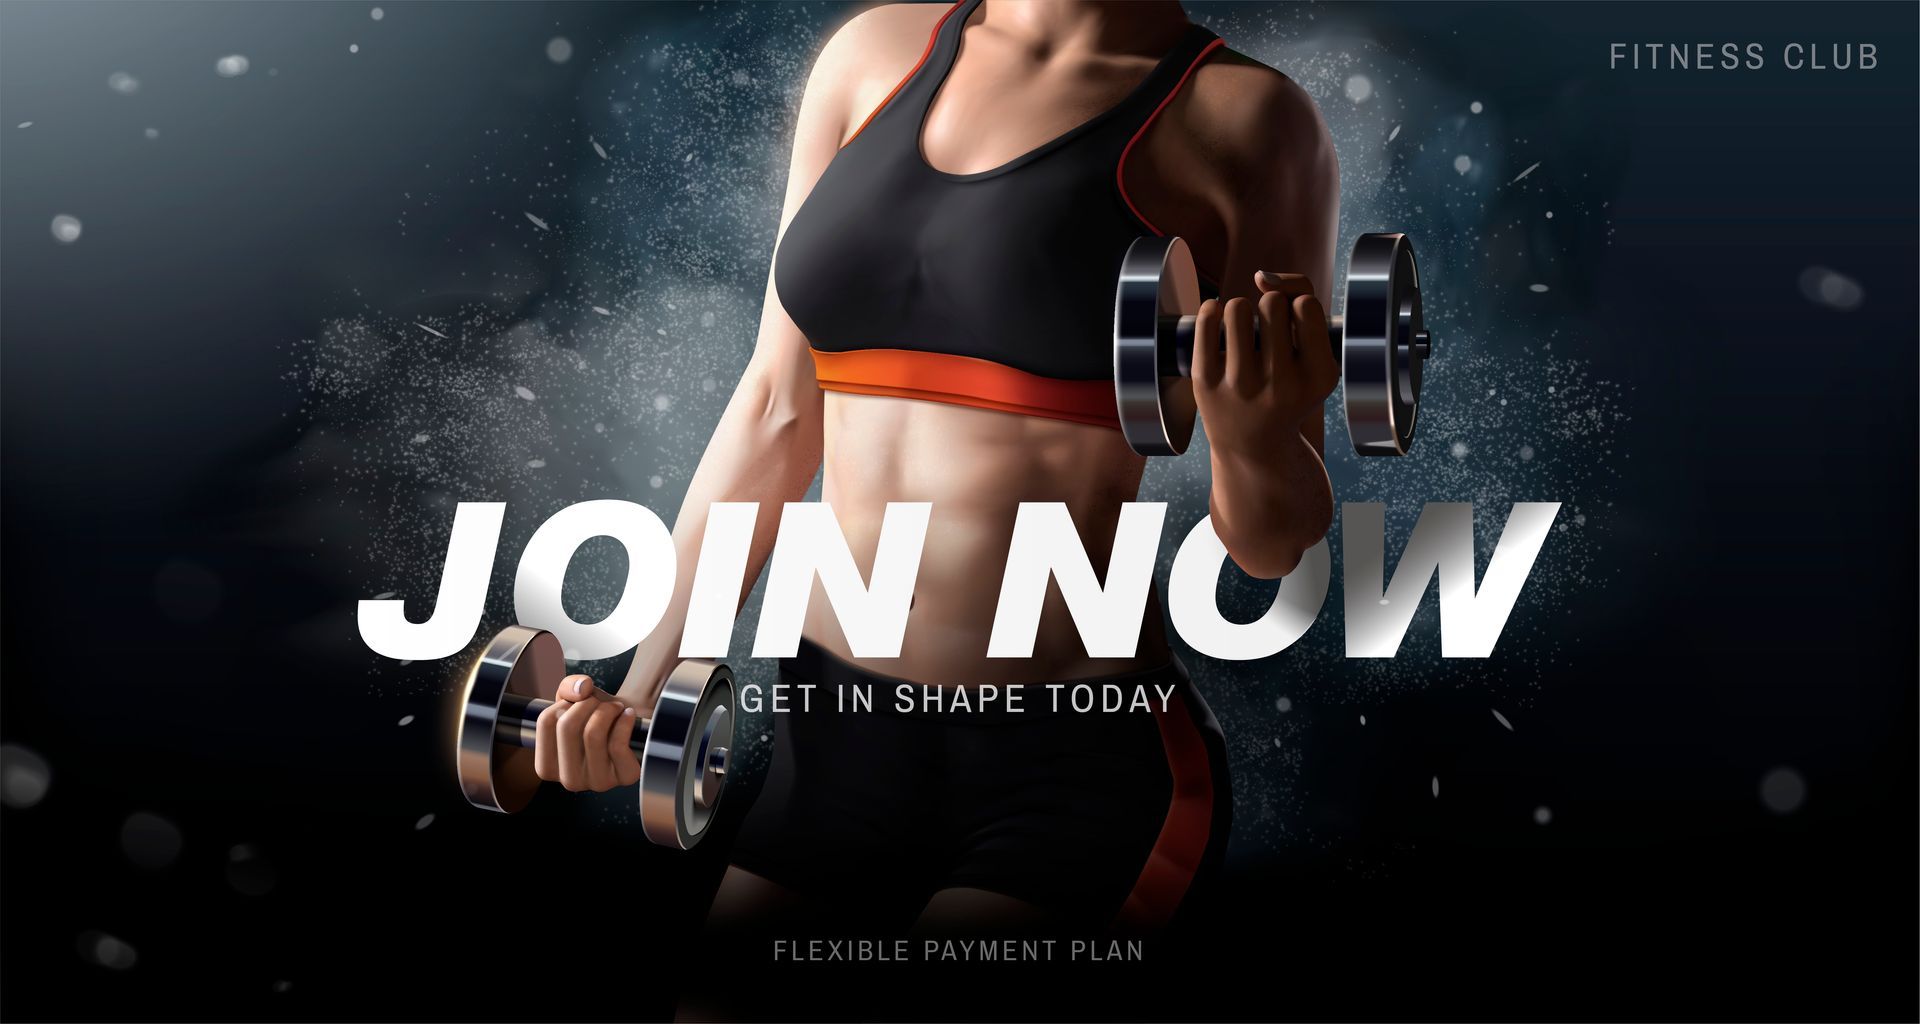 WOMAN IN GYM USES DUMBBELLS TO PROMOTE ONLINE MEMBERSHIP OFFER